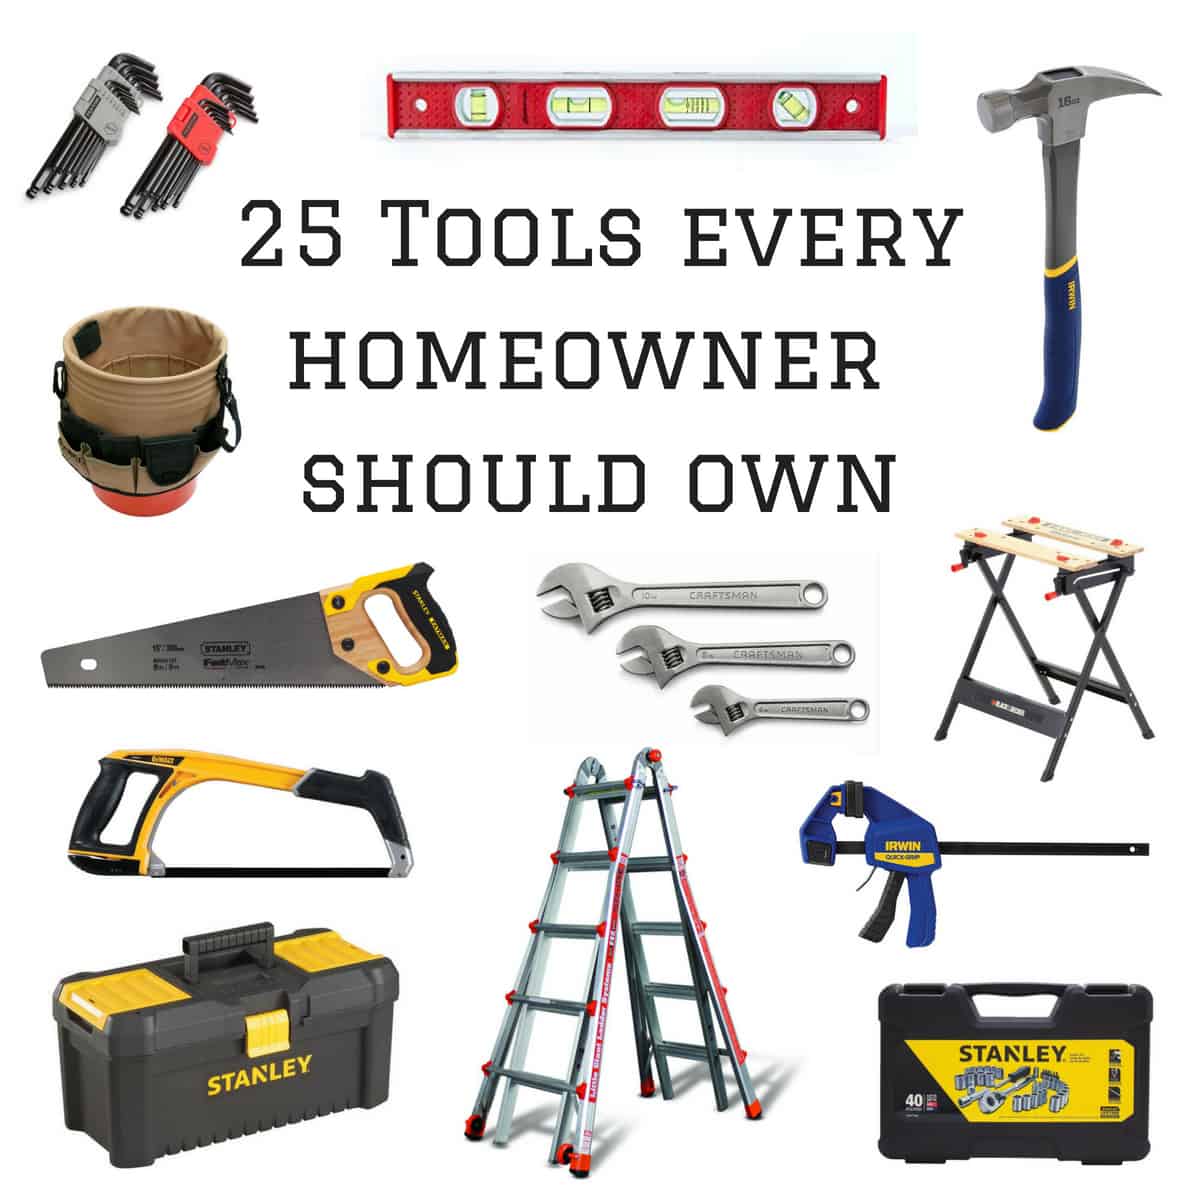 What tools do you need to build a house, Part 1